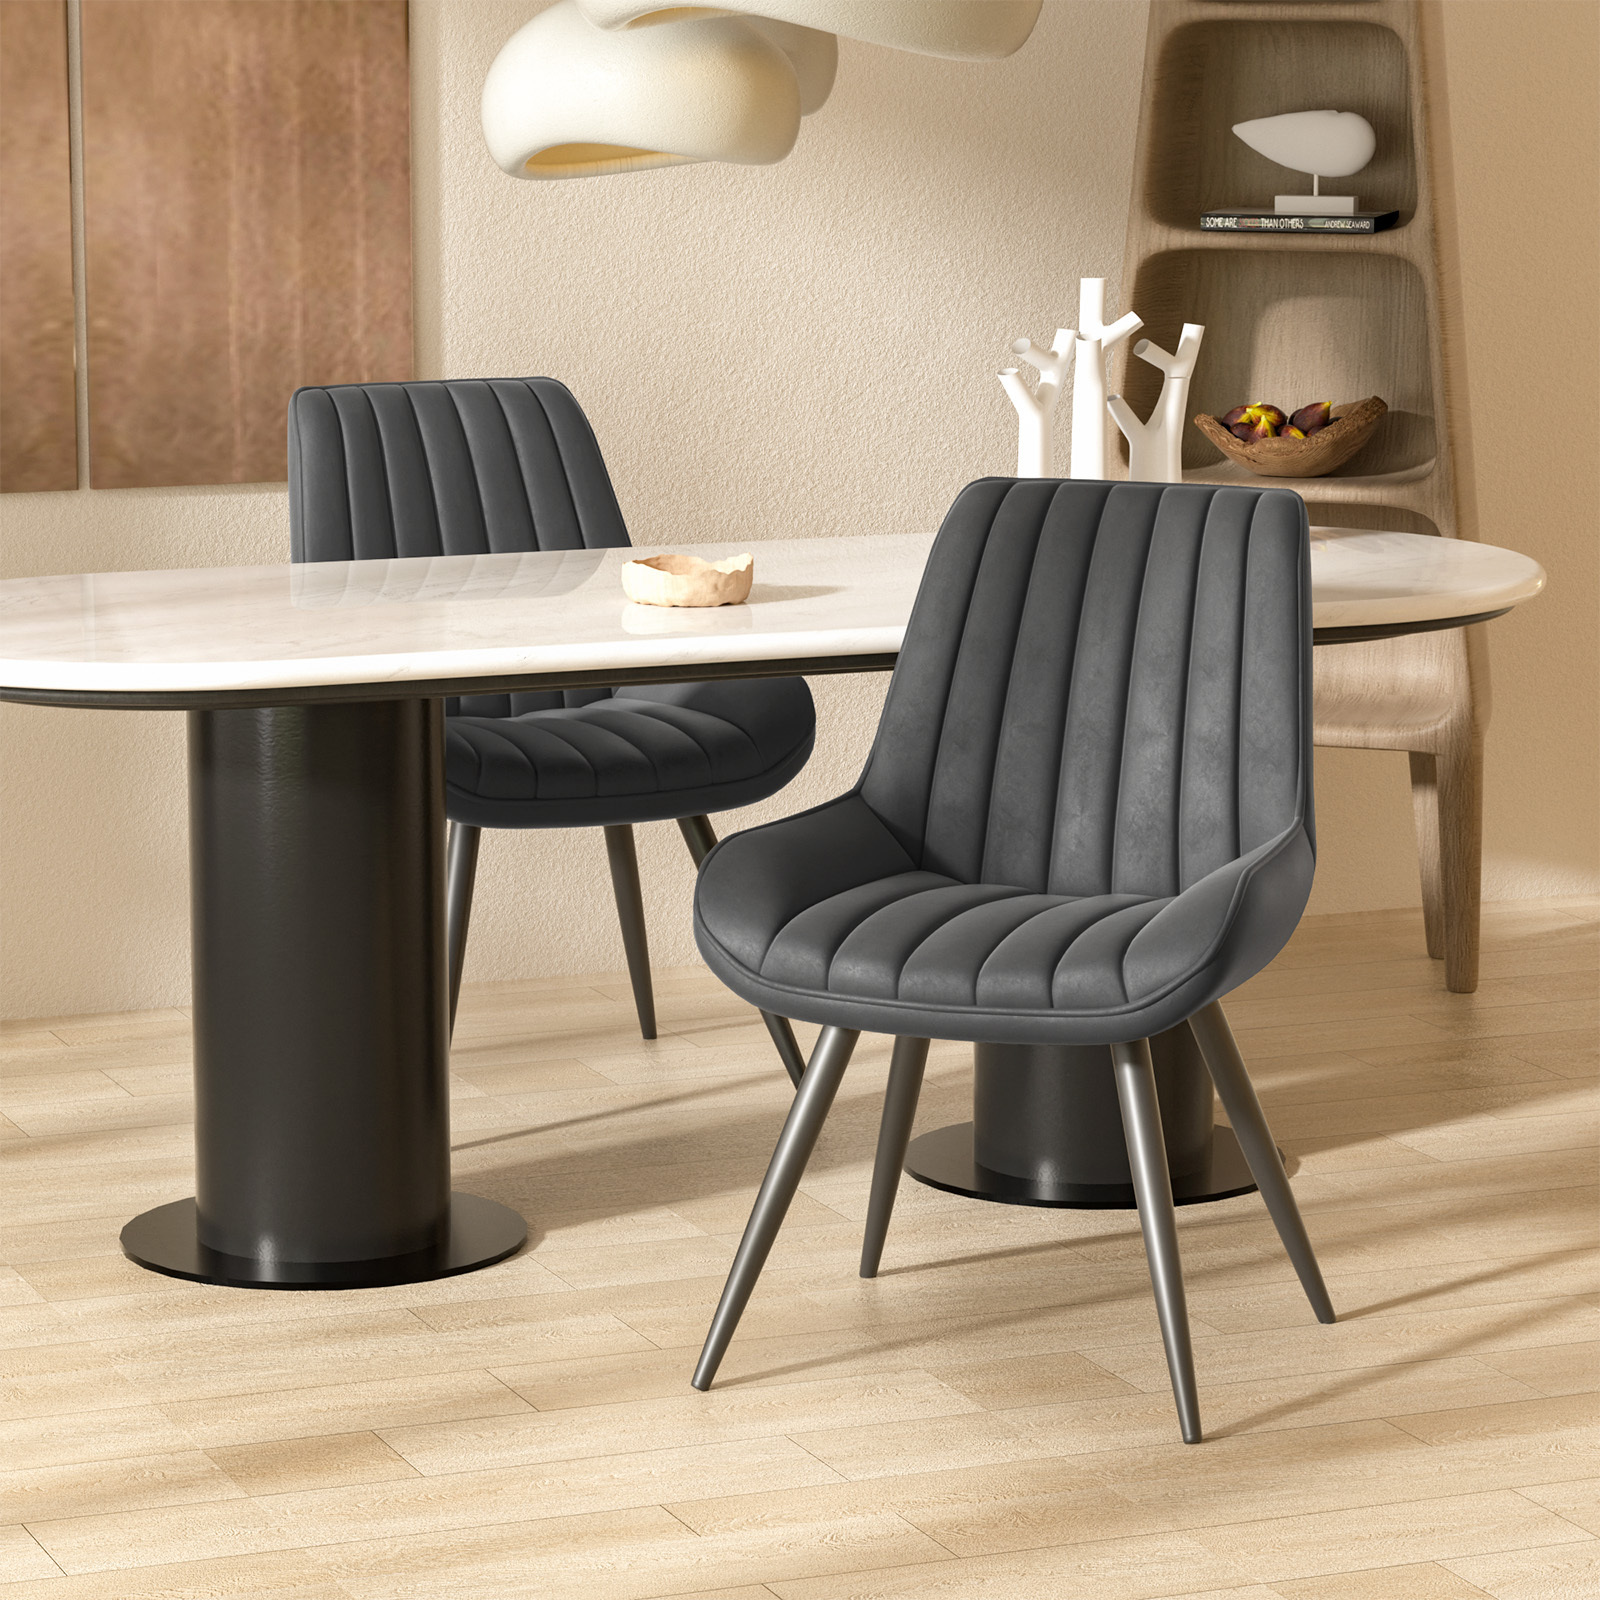 

Modern Dining Chairs, Comfy Dining Room Chairs With Thick Cushions, Upholstered Fabric Kitchen Side Chairs With Metal Legs